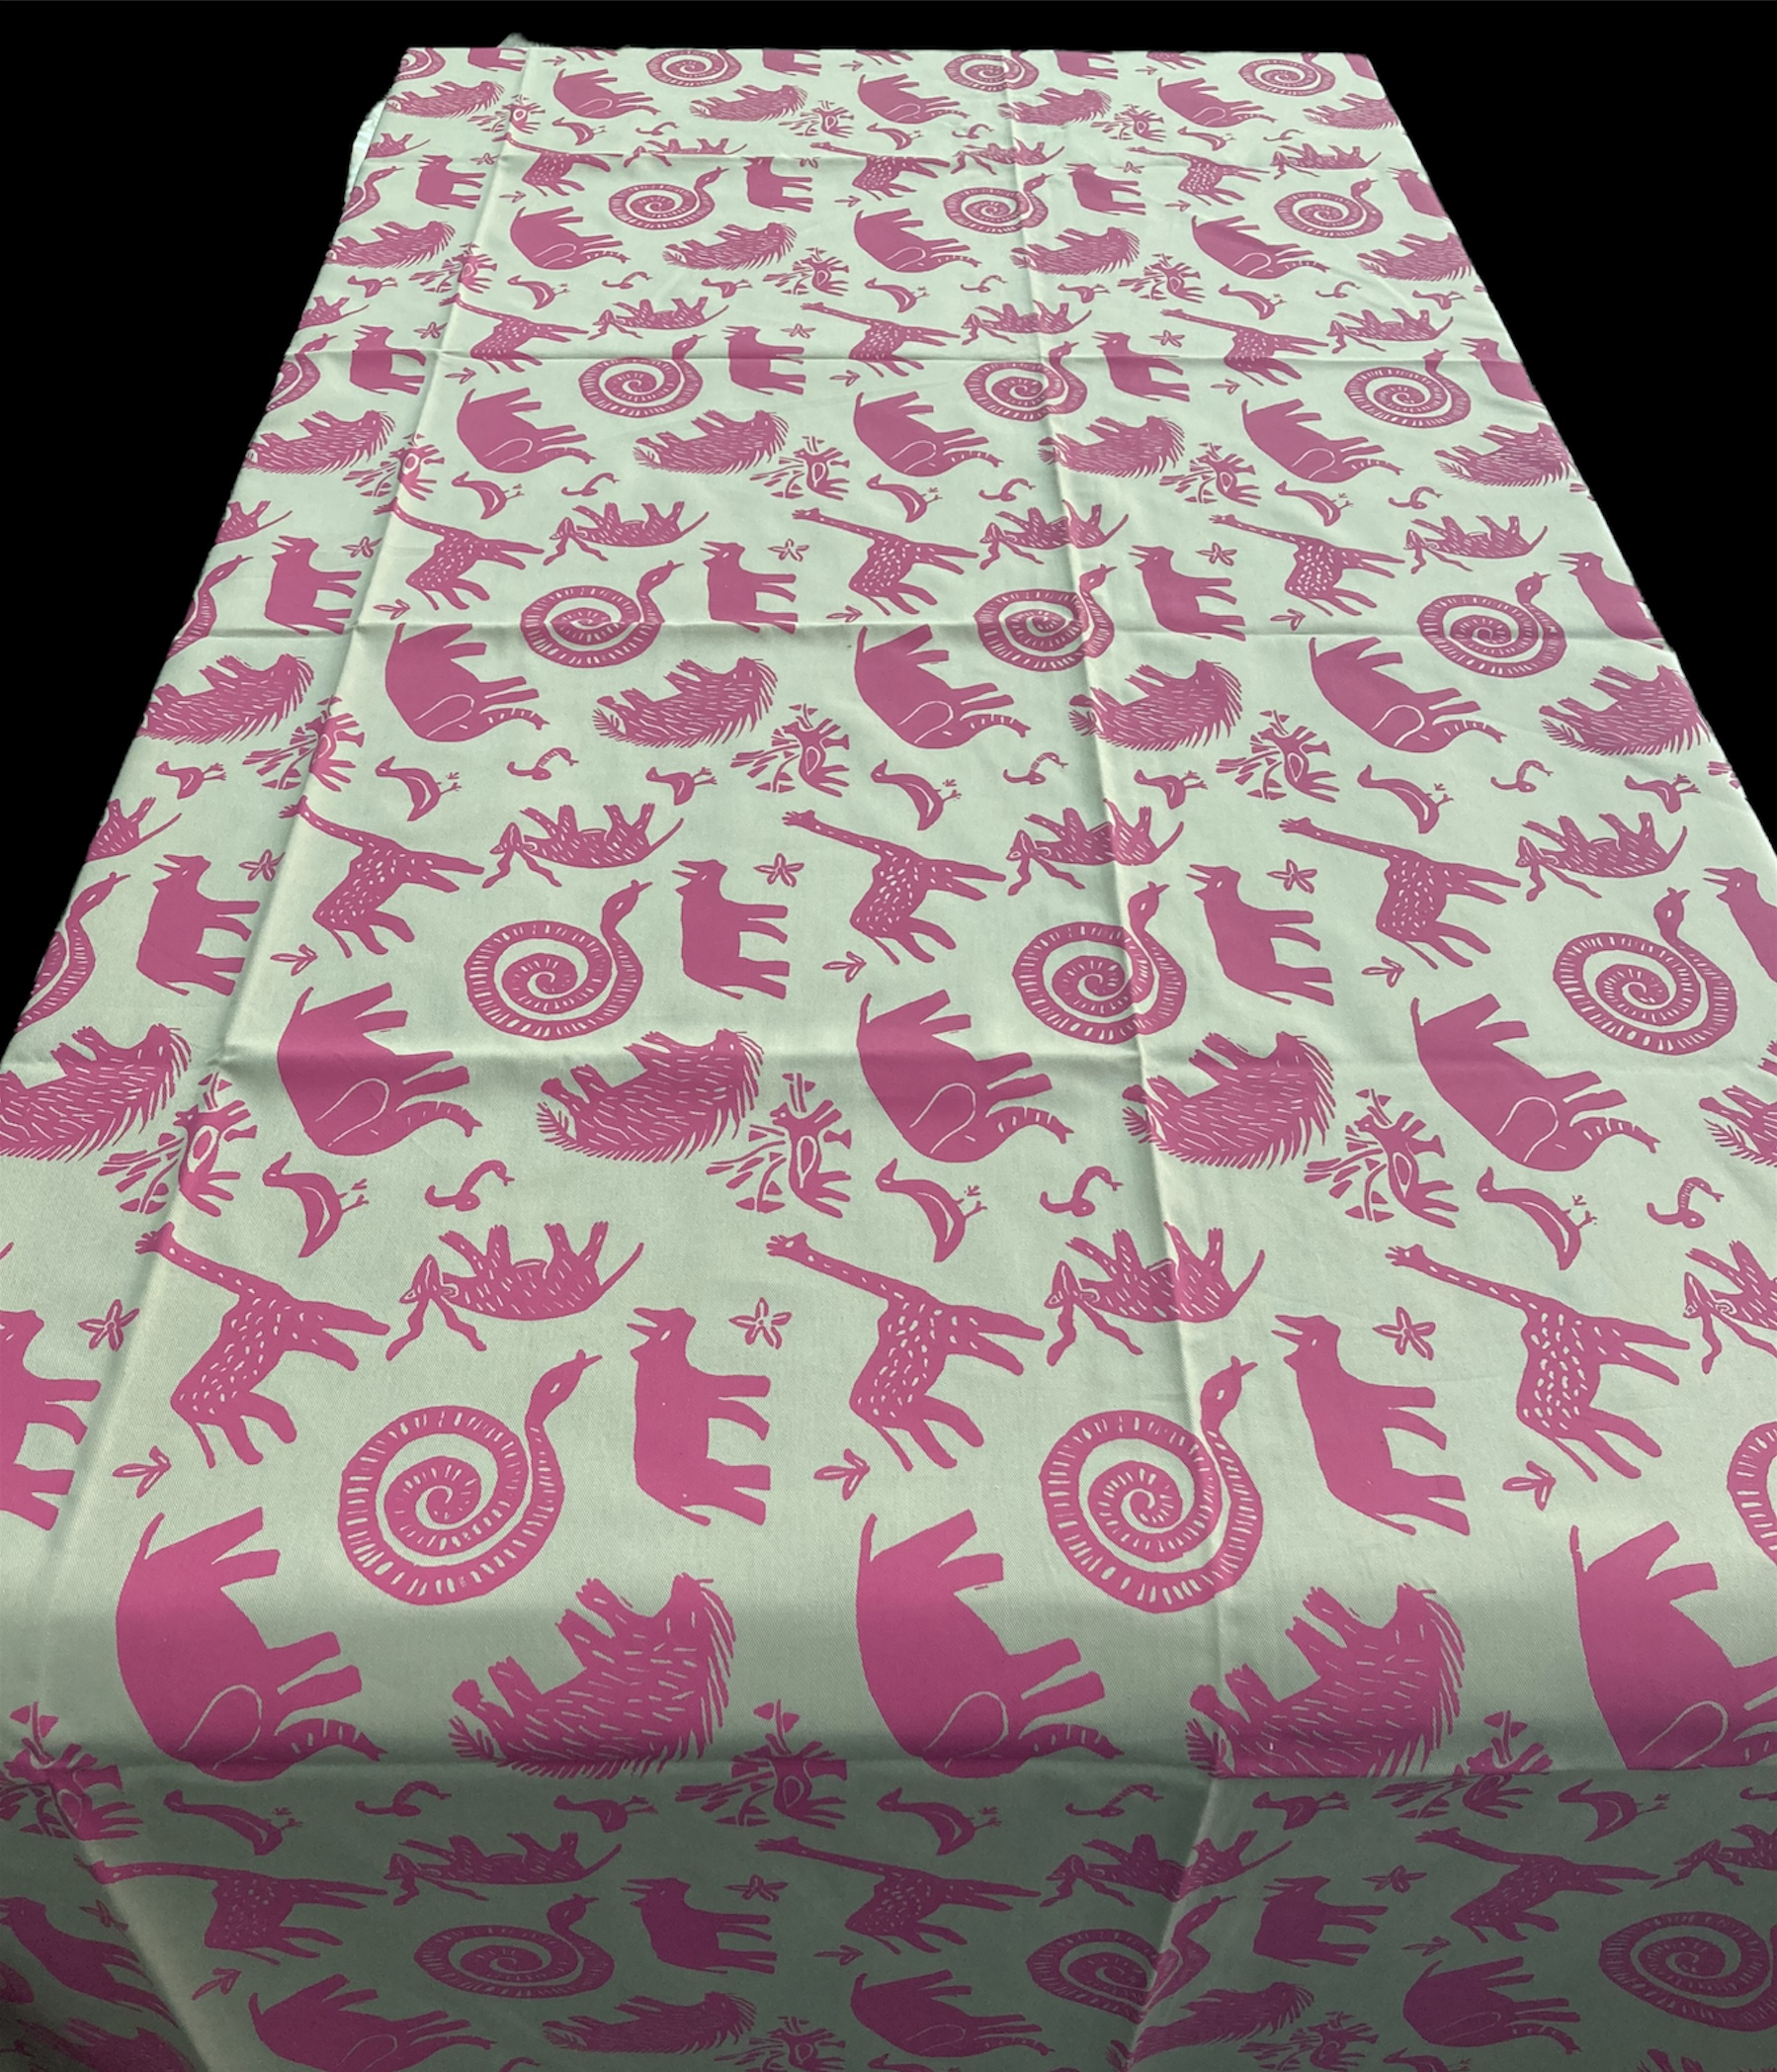 100% cotton Tablecloth approx. 98\" x 57\" from Namibia - # p20t